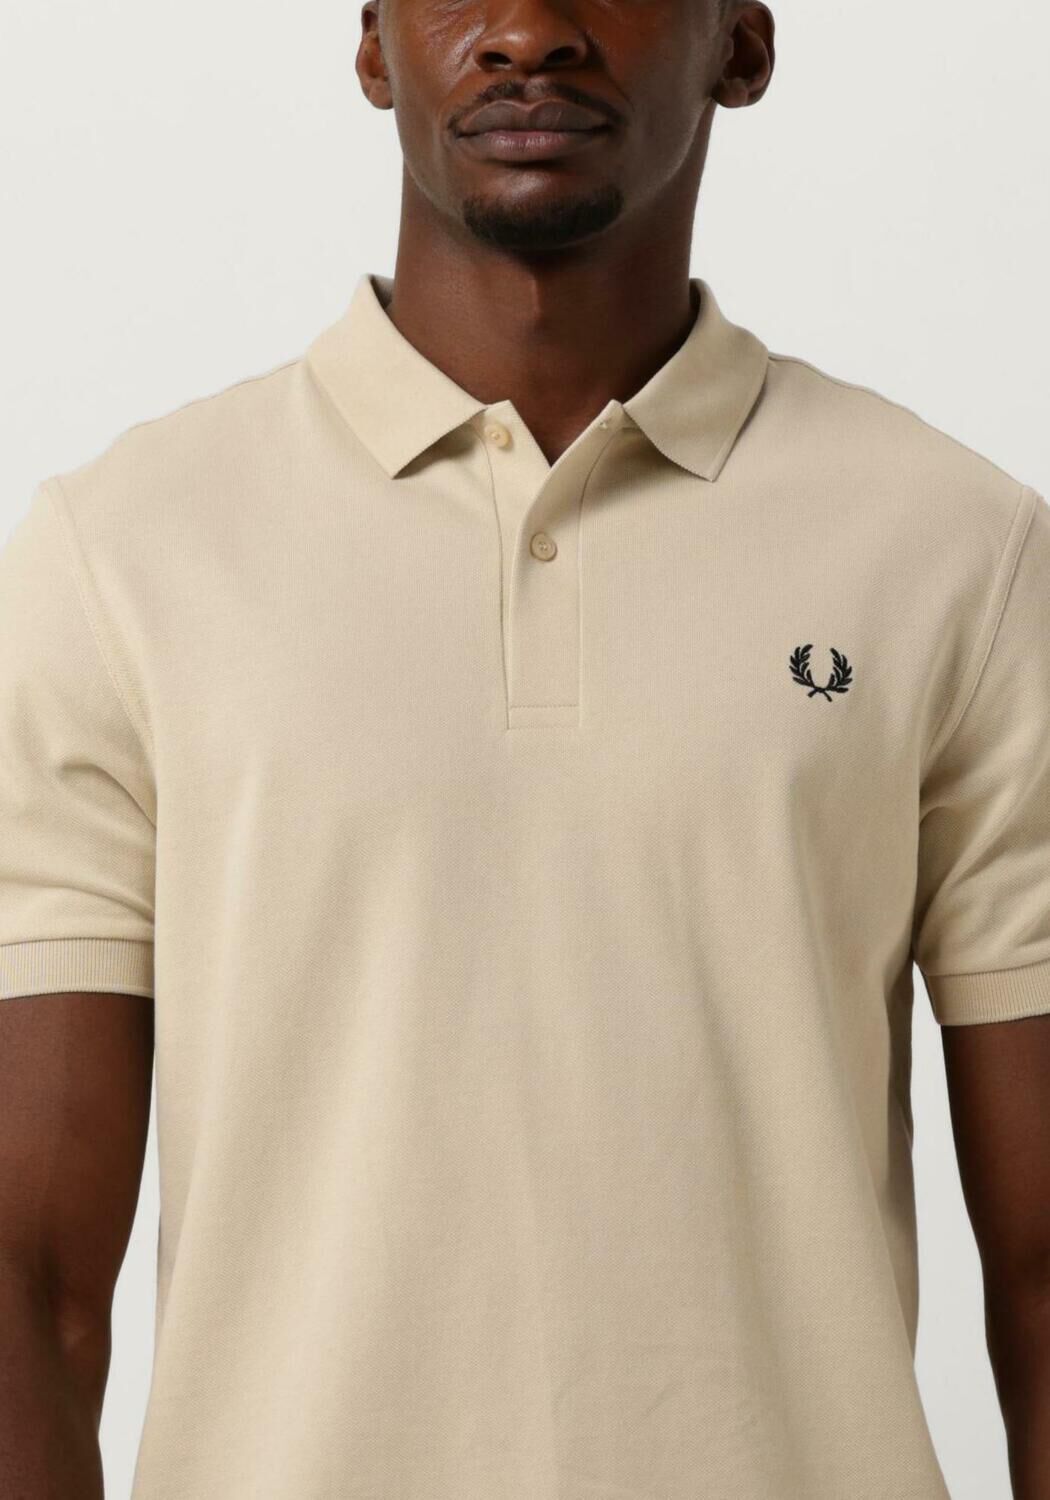 FRED PERRY Heren Polo's & T-shirts The Plain Shirt Zand